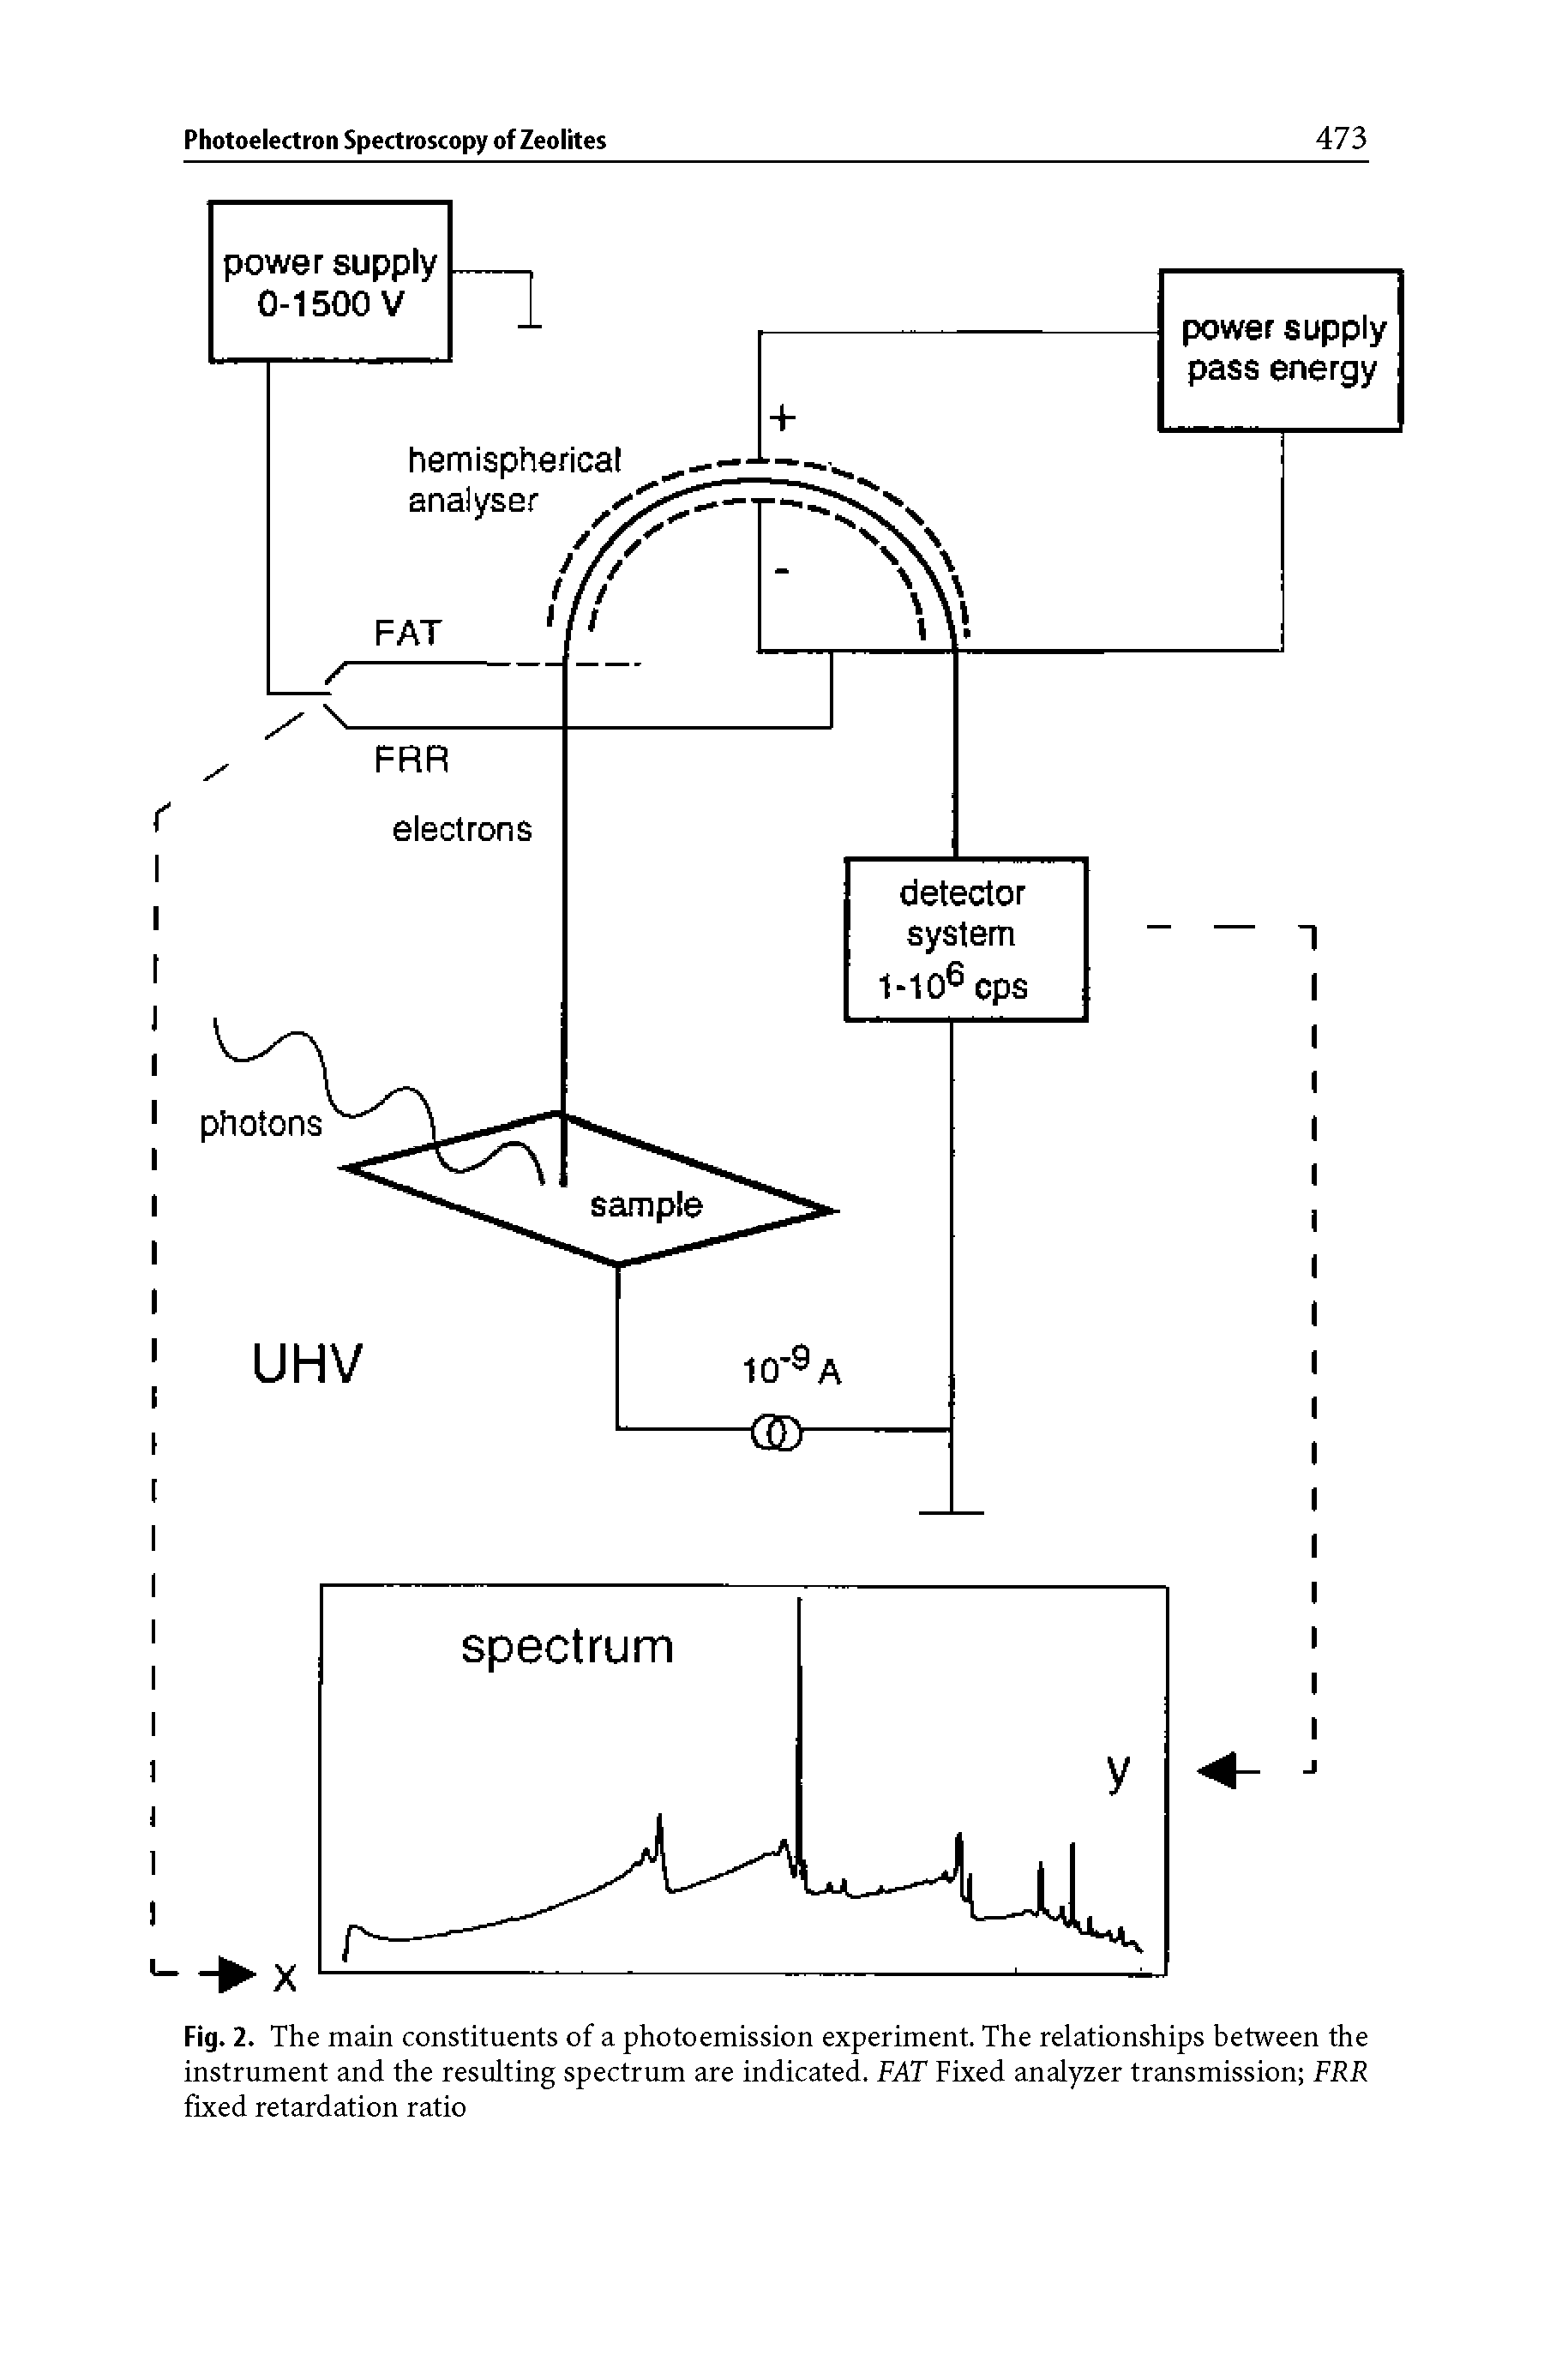 Fig. 2. The main constituents of a photoemission experiment. The relationships between the instrument and the resulting spectrum are indicated. FAT Fixed analyzer transmission FRR fixed retardation ratio...